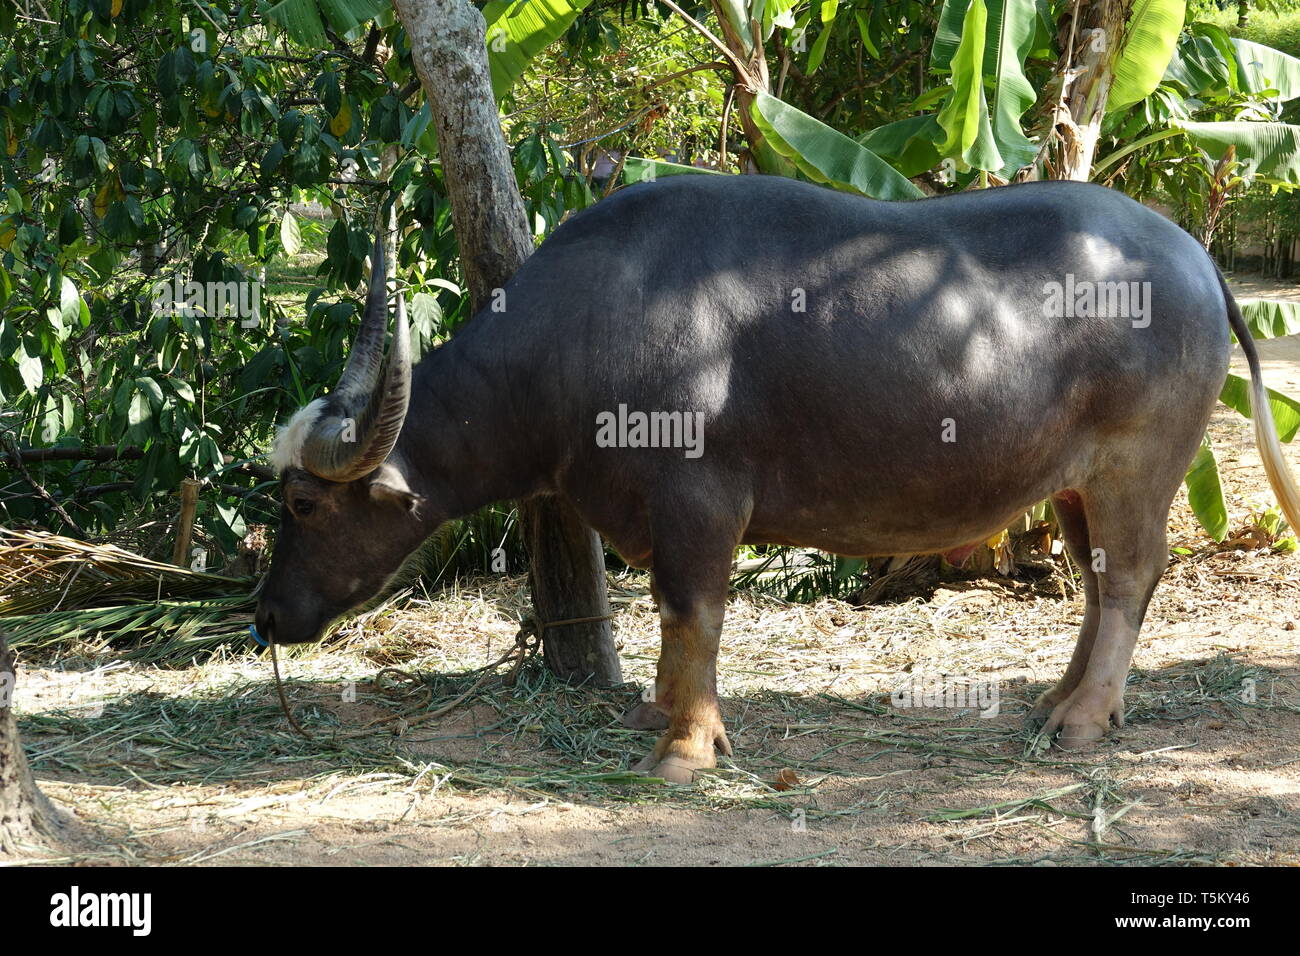 Phuket, Thailand. 28th Feb, 2019. A water buffalo stands on a show ground  with traditional Thai farming methods. Credit: Alexandra Schuler/dpa/Alamy  Live News Stock Photo - Alamy